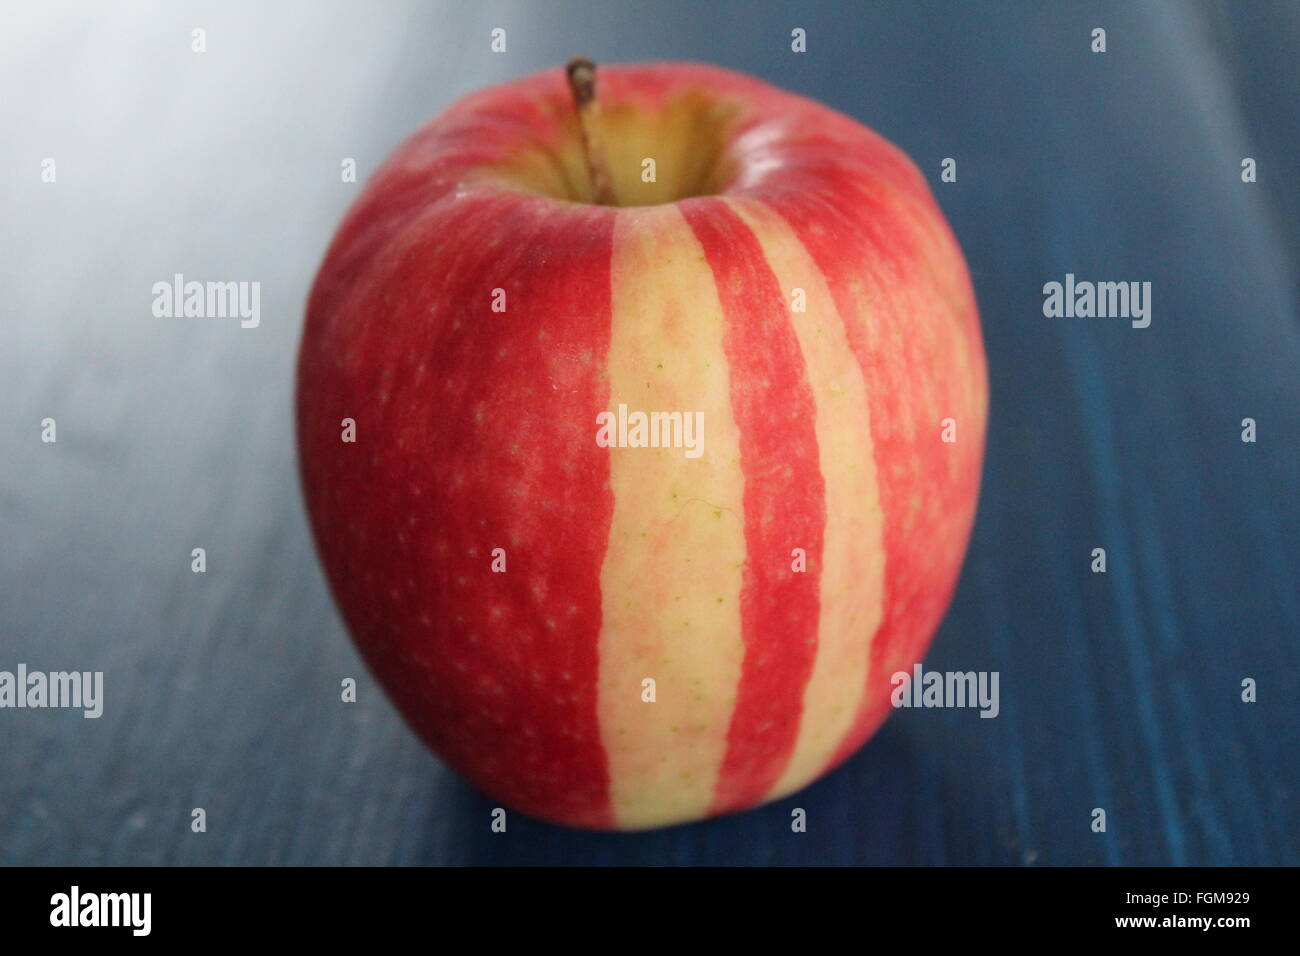 Striped red apple on blue table Stock Photo